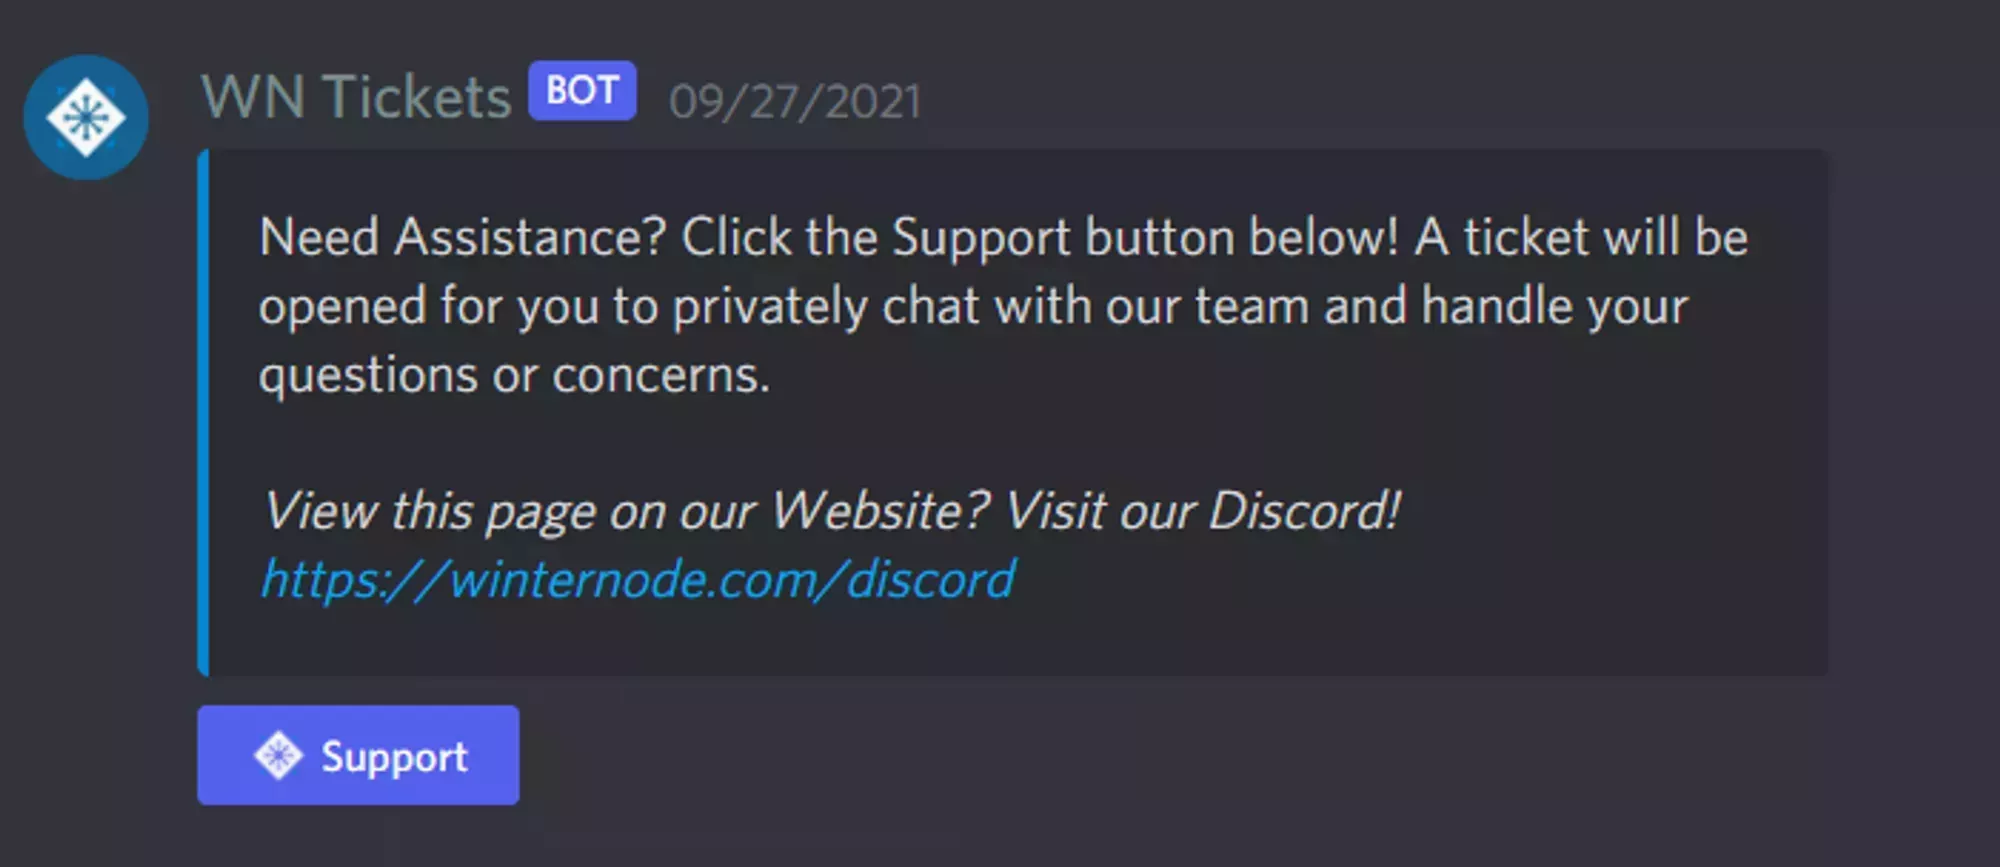 The Open Ticket message in the WinterNode Discord Support channel with a Support button located on the bottom of the message